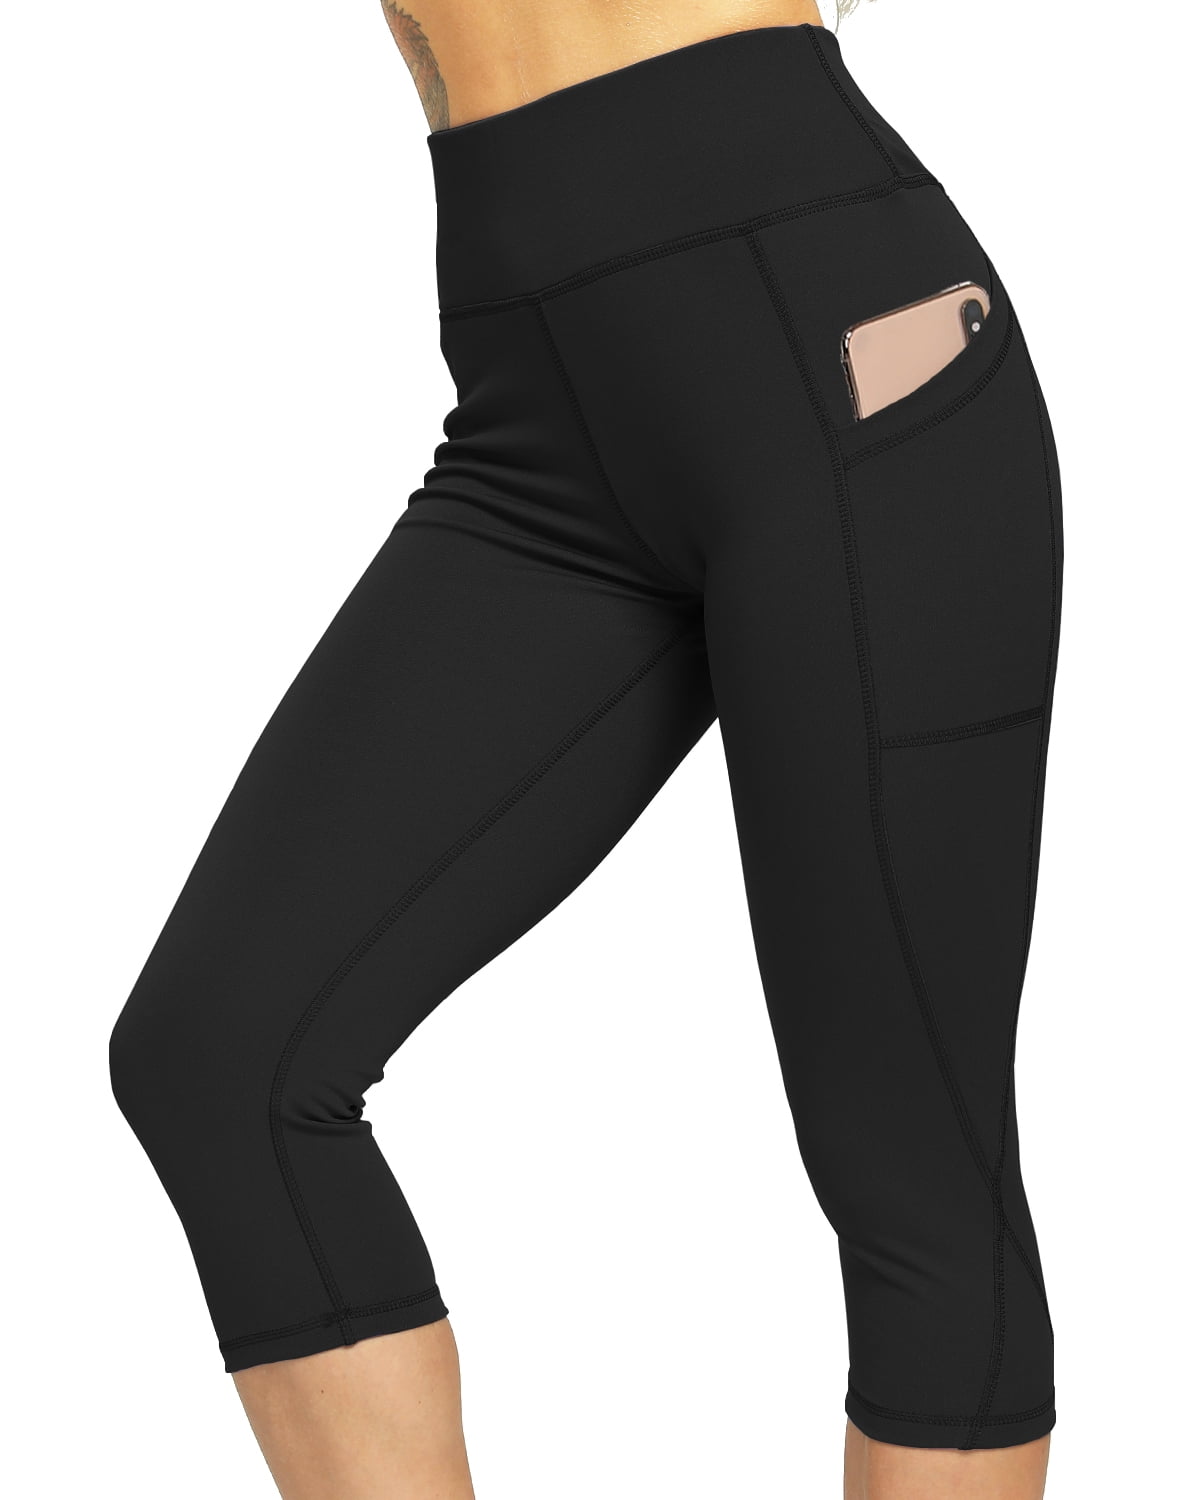 RIOJOY Womens High Waist Yoga Capris Tummy Control Pants with Pockets for  Workout 